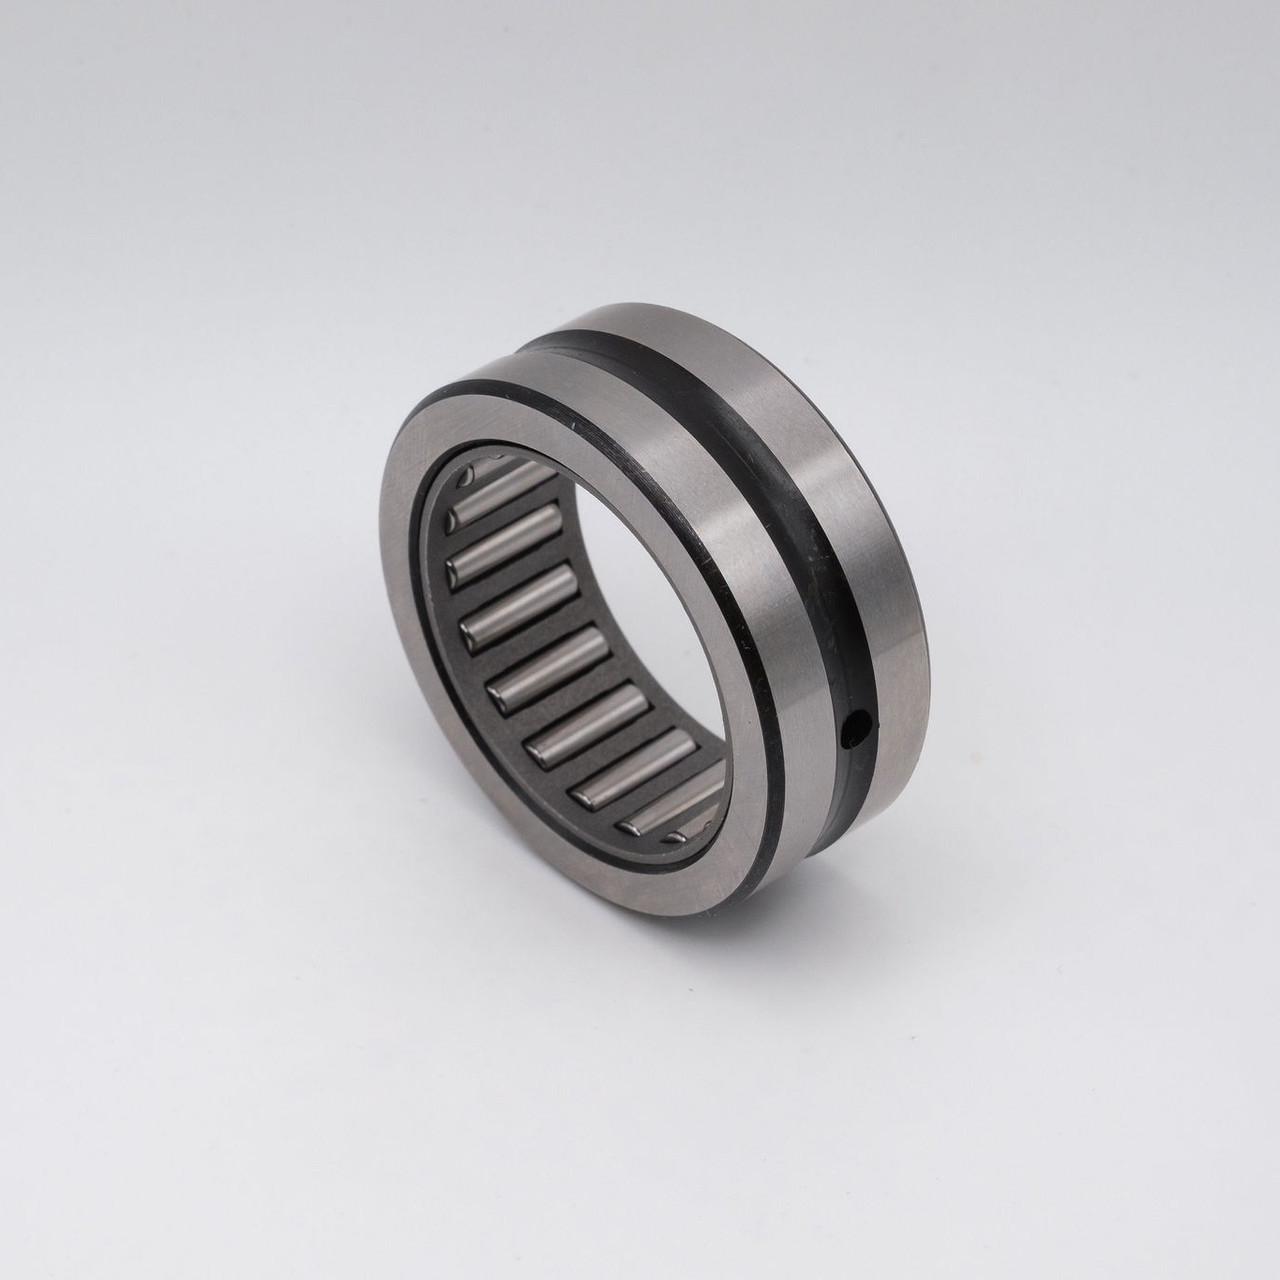 JD10105 Machined Needle Roller Bearing 32x17x45mm Back Right Angled View